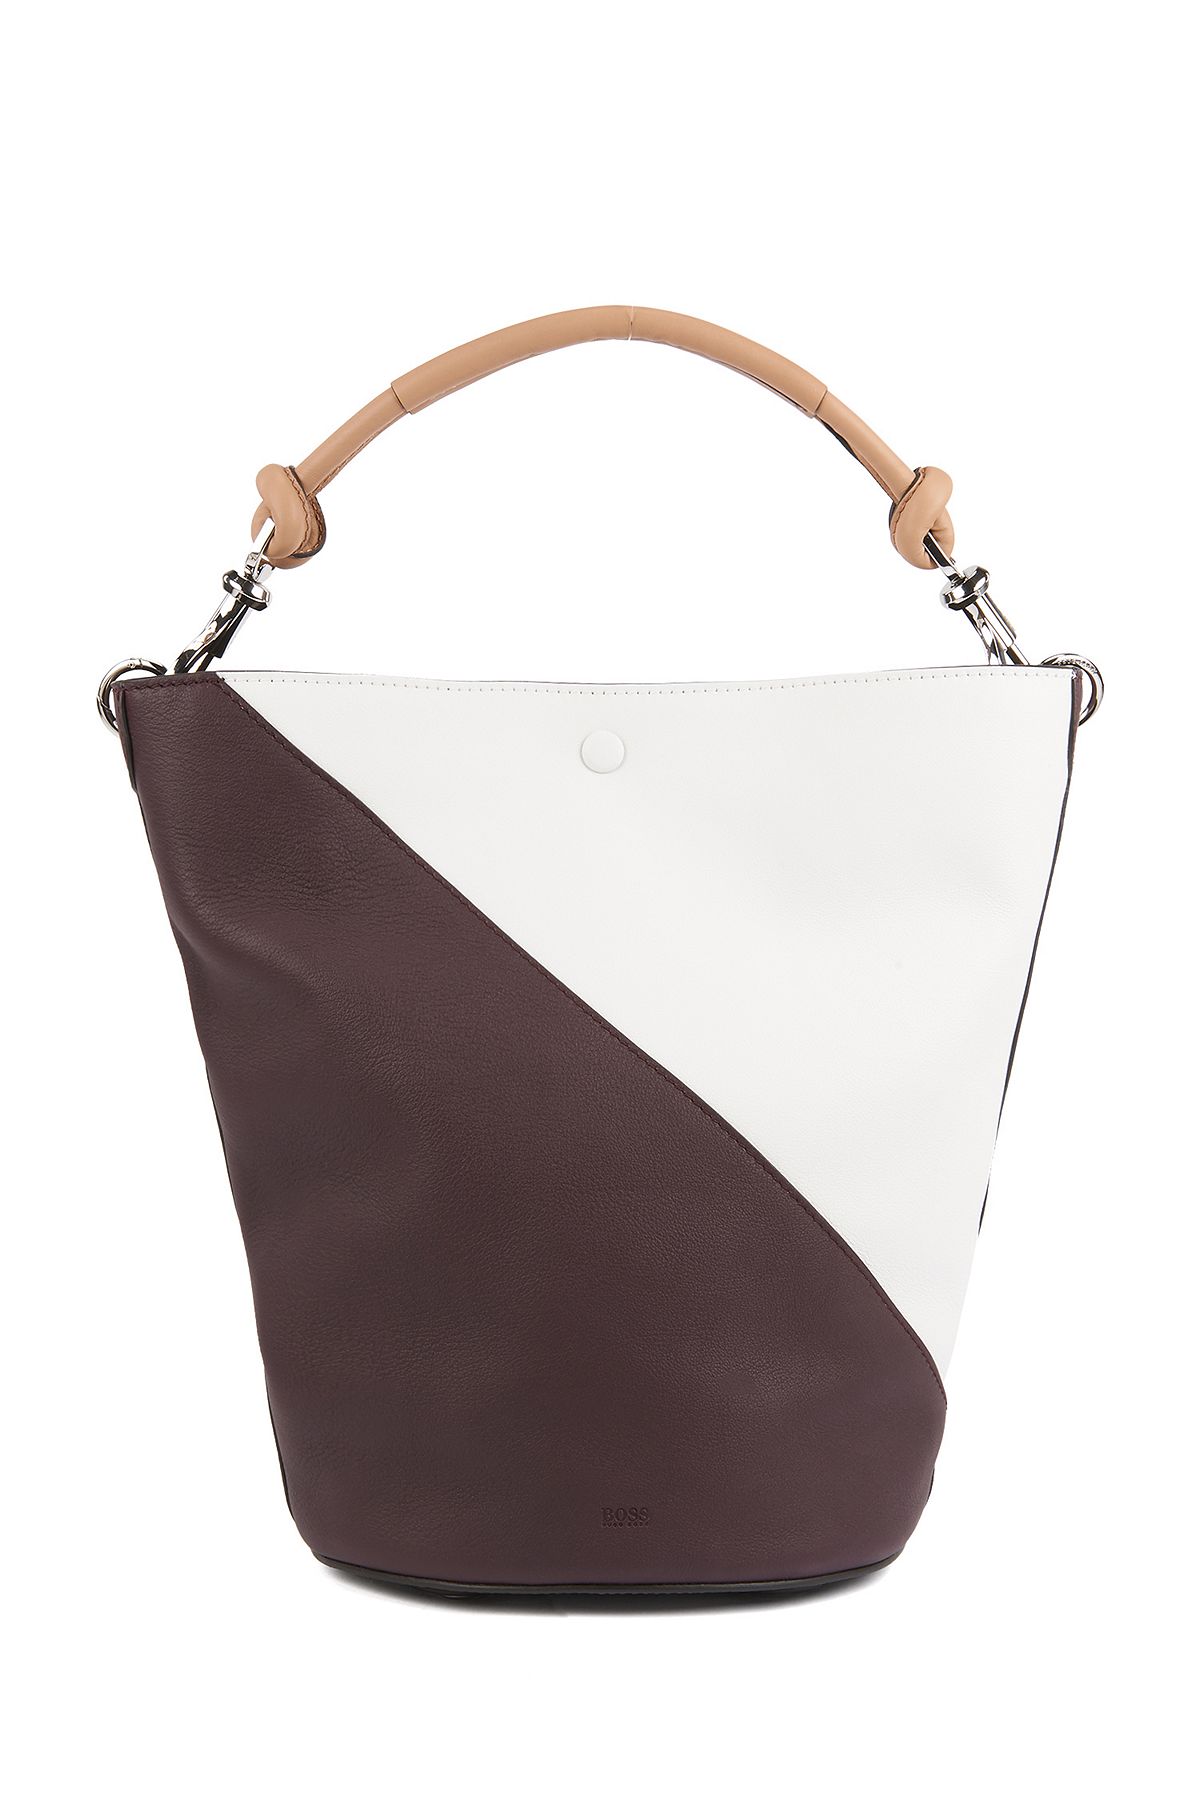 Colourblock bucket bag in soft leather, Dark Red